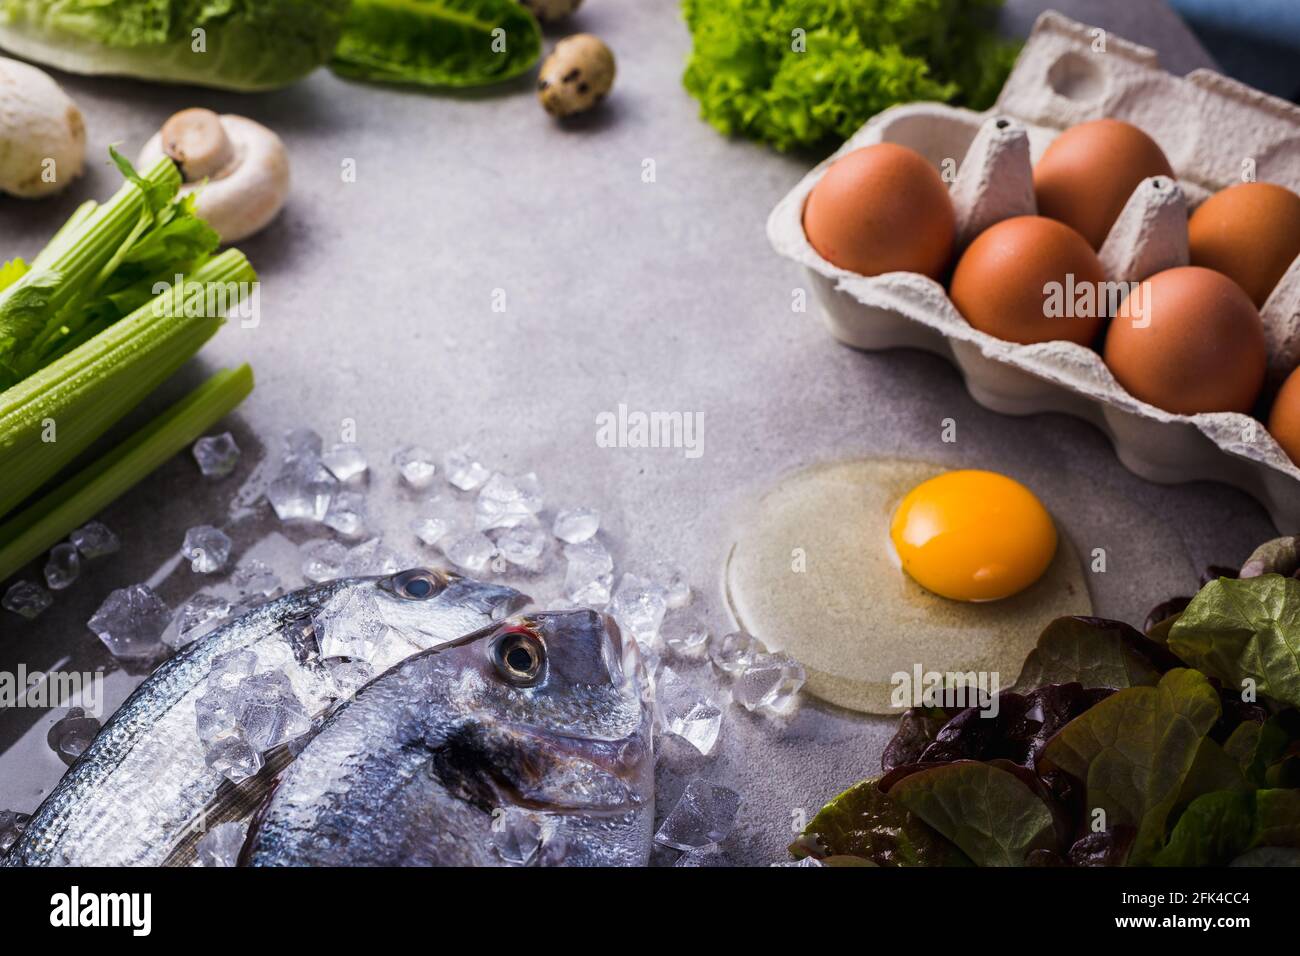 Frame of raw cooking ingredients for tasty and healthy food. Fresh dorado fish on ice, vegetables, eggs on gray concrete background top view. Stock Photo